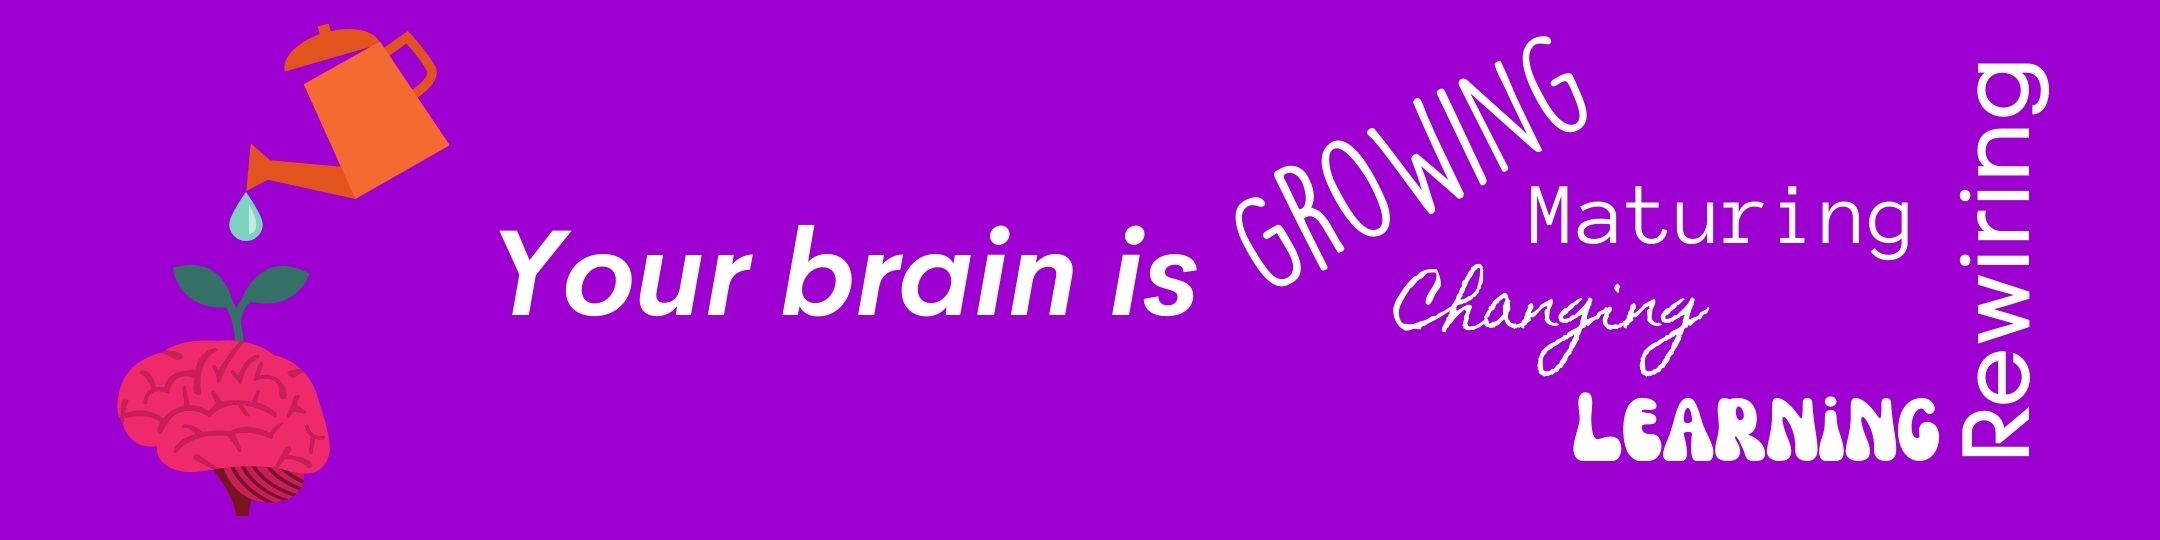 Your brain is growing, changing, maturing, learning, and rewiring.